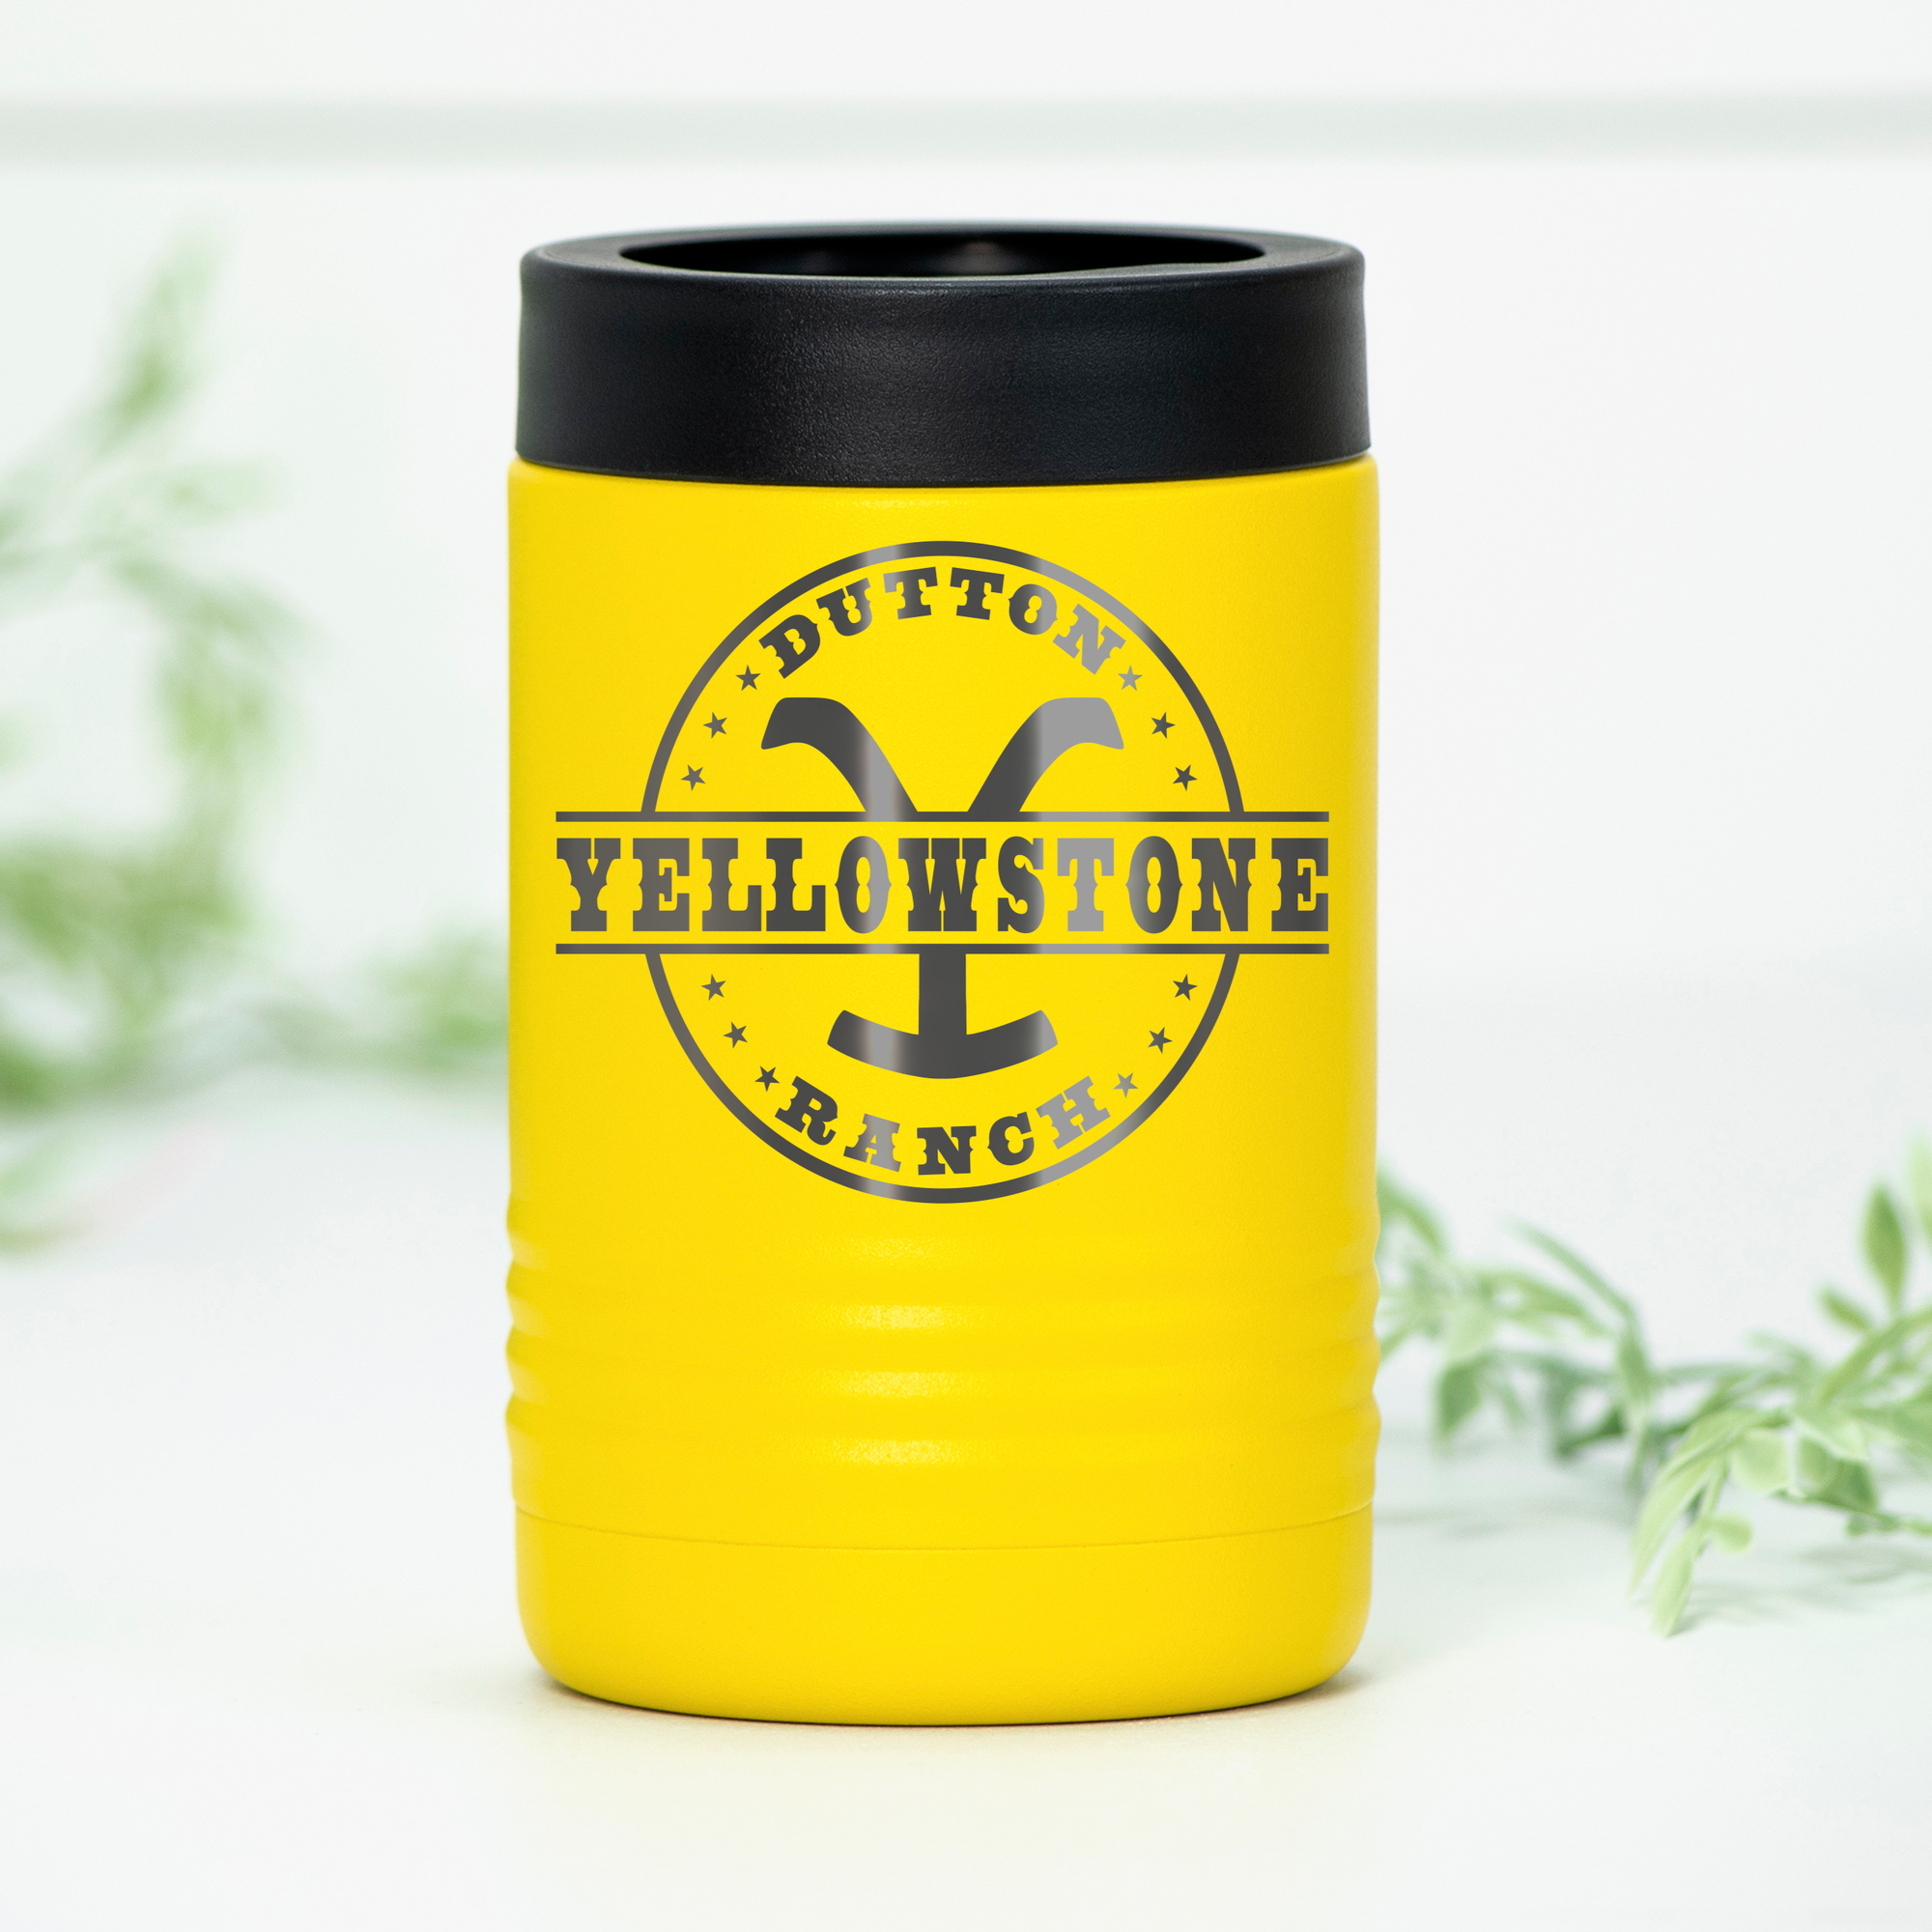 Yellowstone Engraved Can Cooler